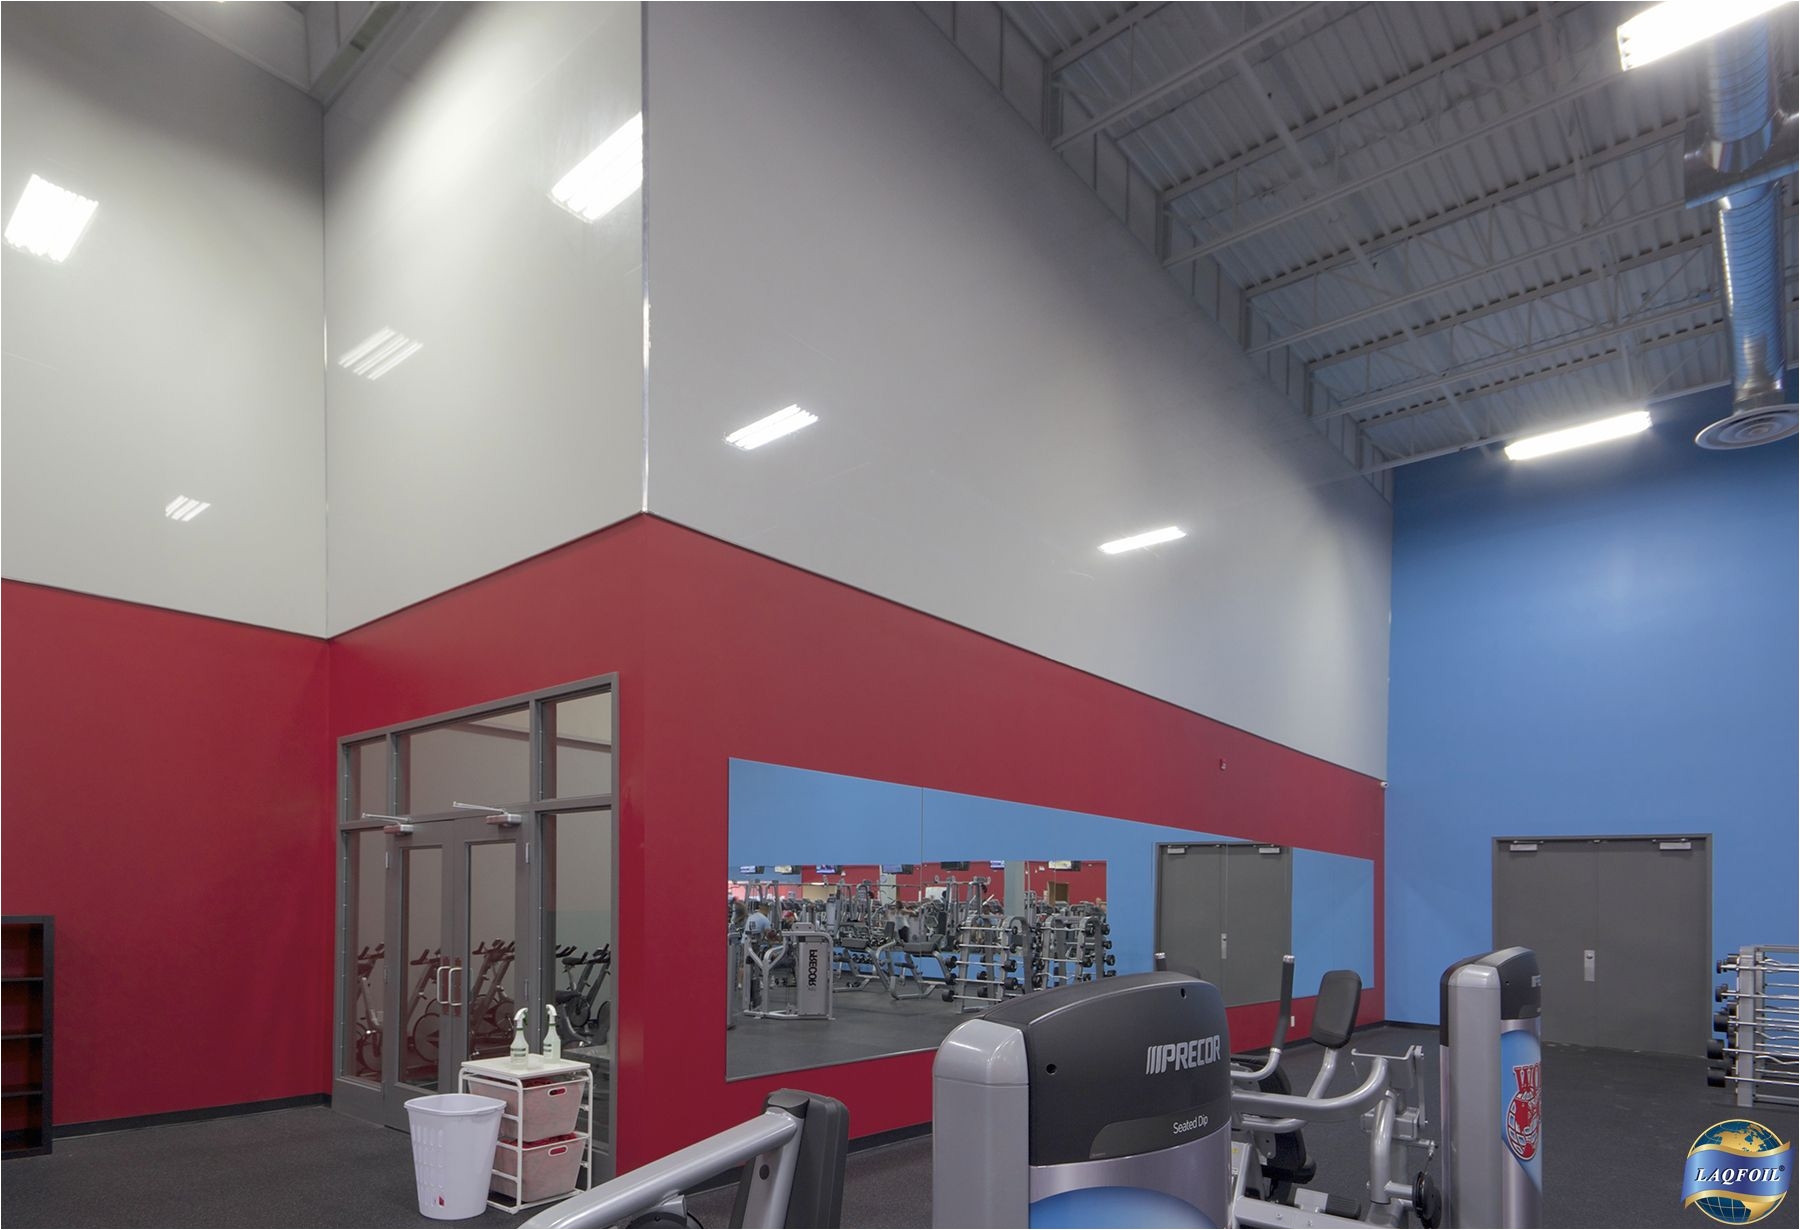 world gym waterloo ontario canada above the red wall there was a space where sound was spilling over into this room from the the other side